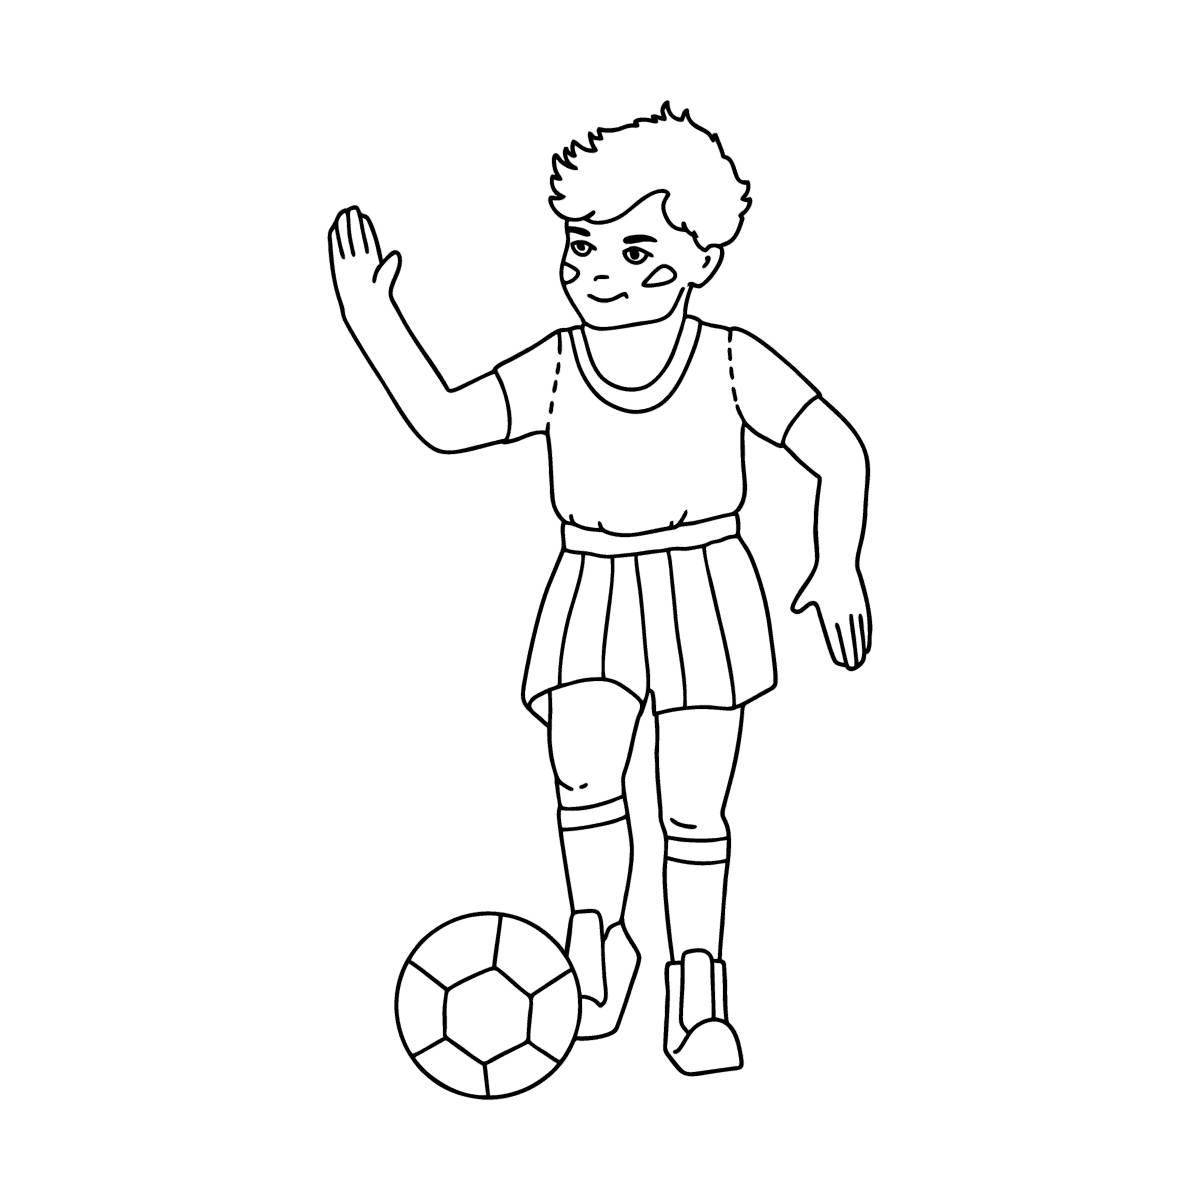 Coloring page of a persistent footballer